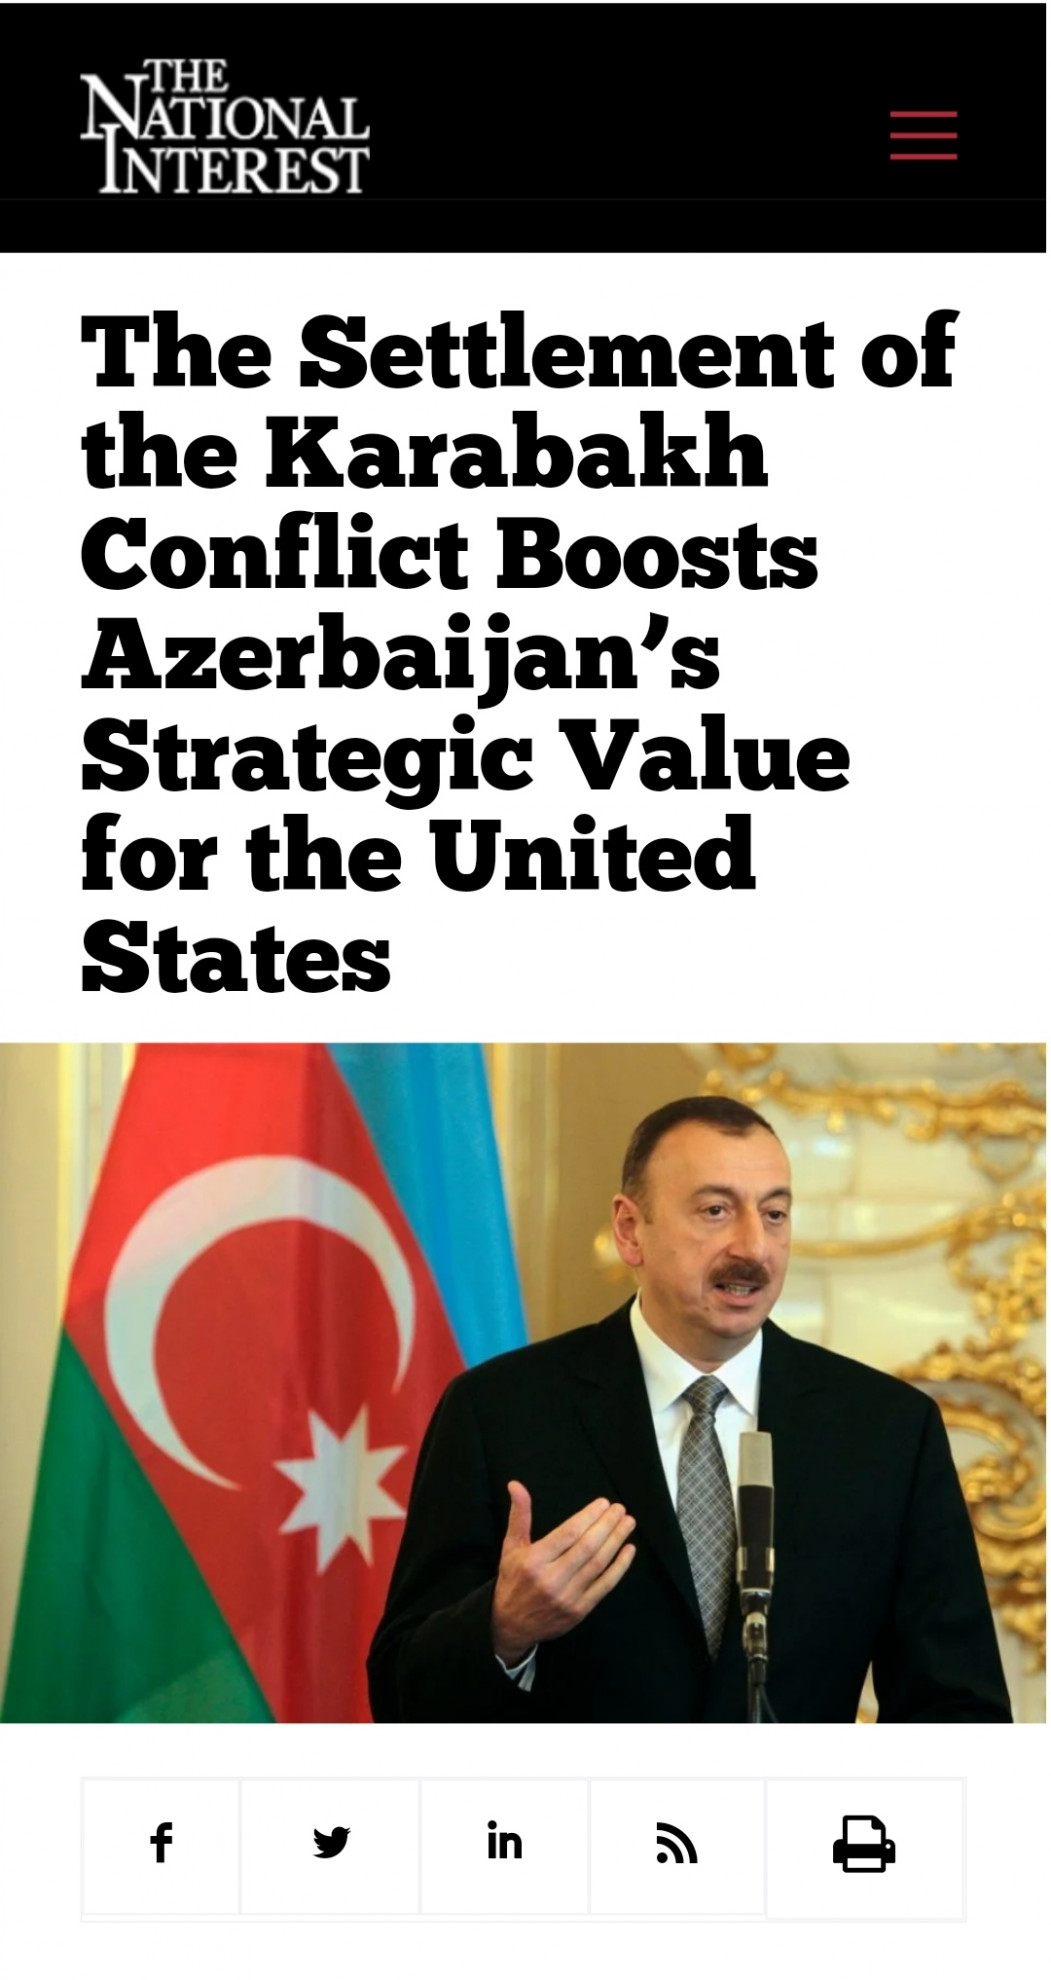 The Settlement of the Karabakh Conflict Boosts Azerbaijan’s Strategic Value for the United States